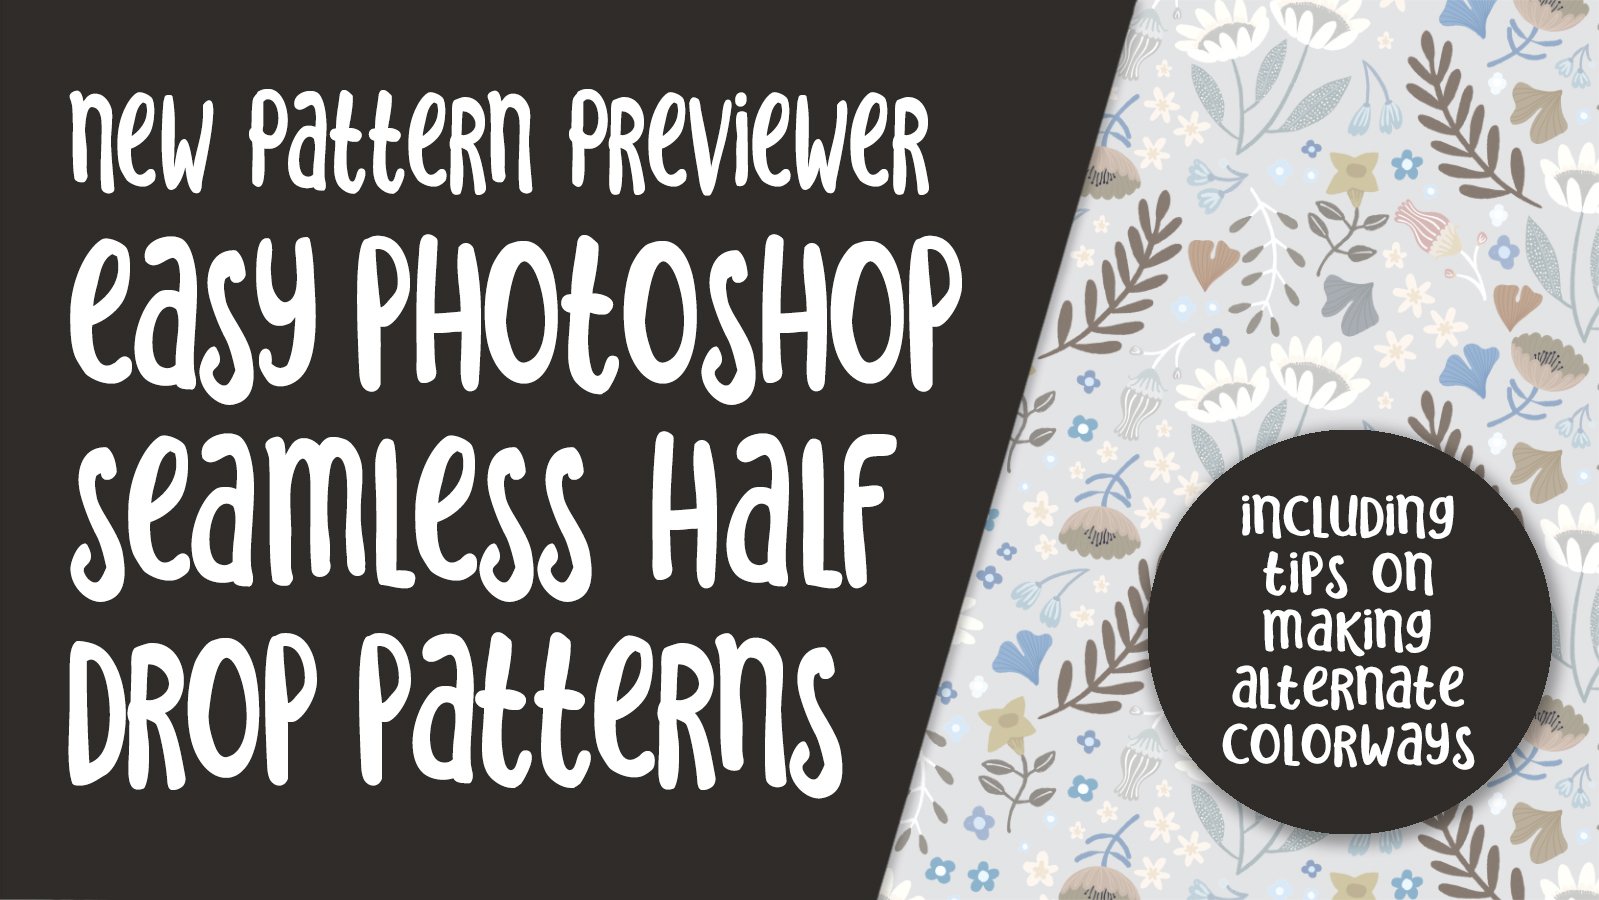 Seamless Half Drop Repeat and Exploring Colorway Options Using Pattern Preview in Photoshop 2021